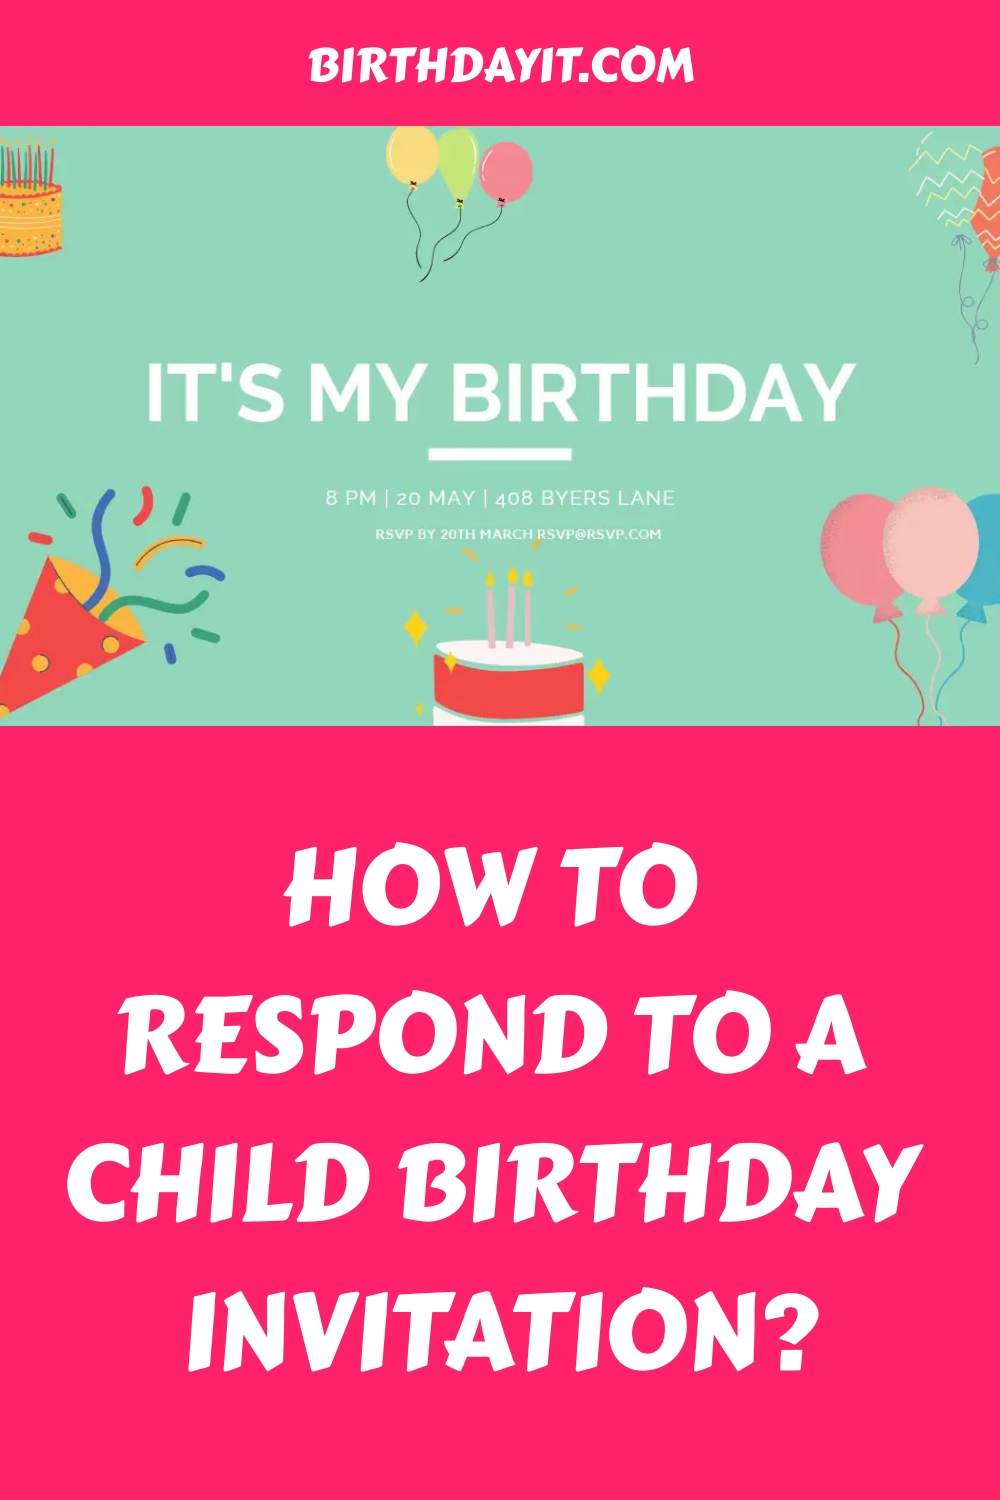 How To Respond To A Child Birthday Invitation generated pin 1190